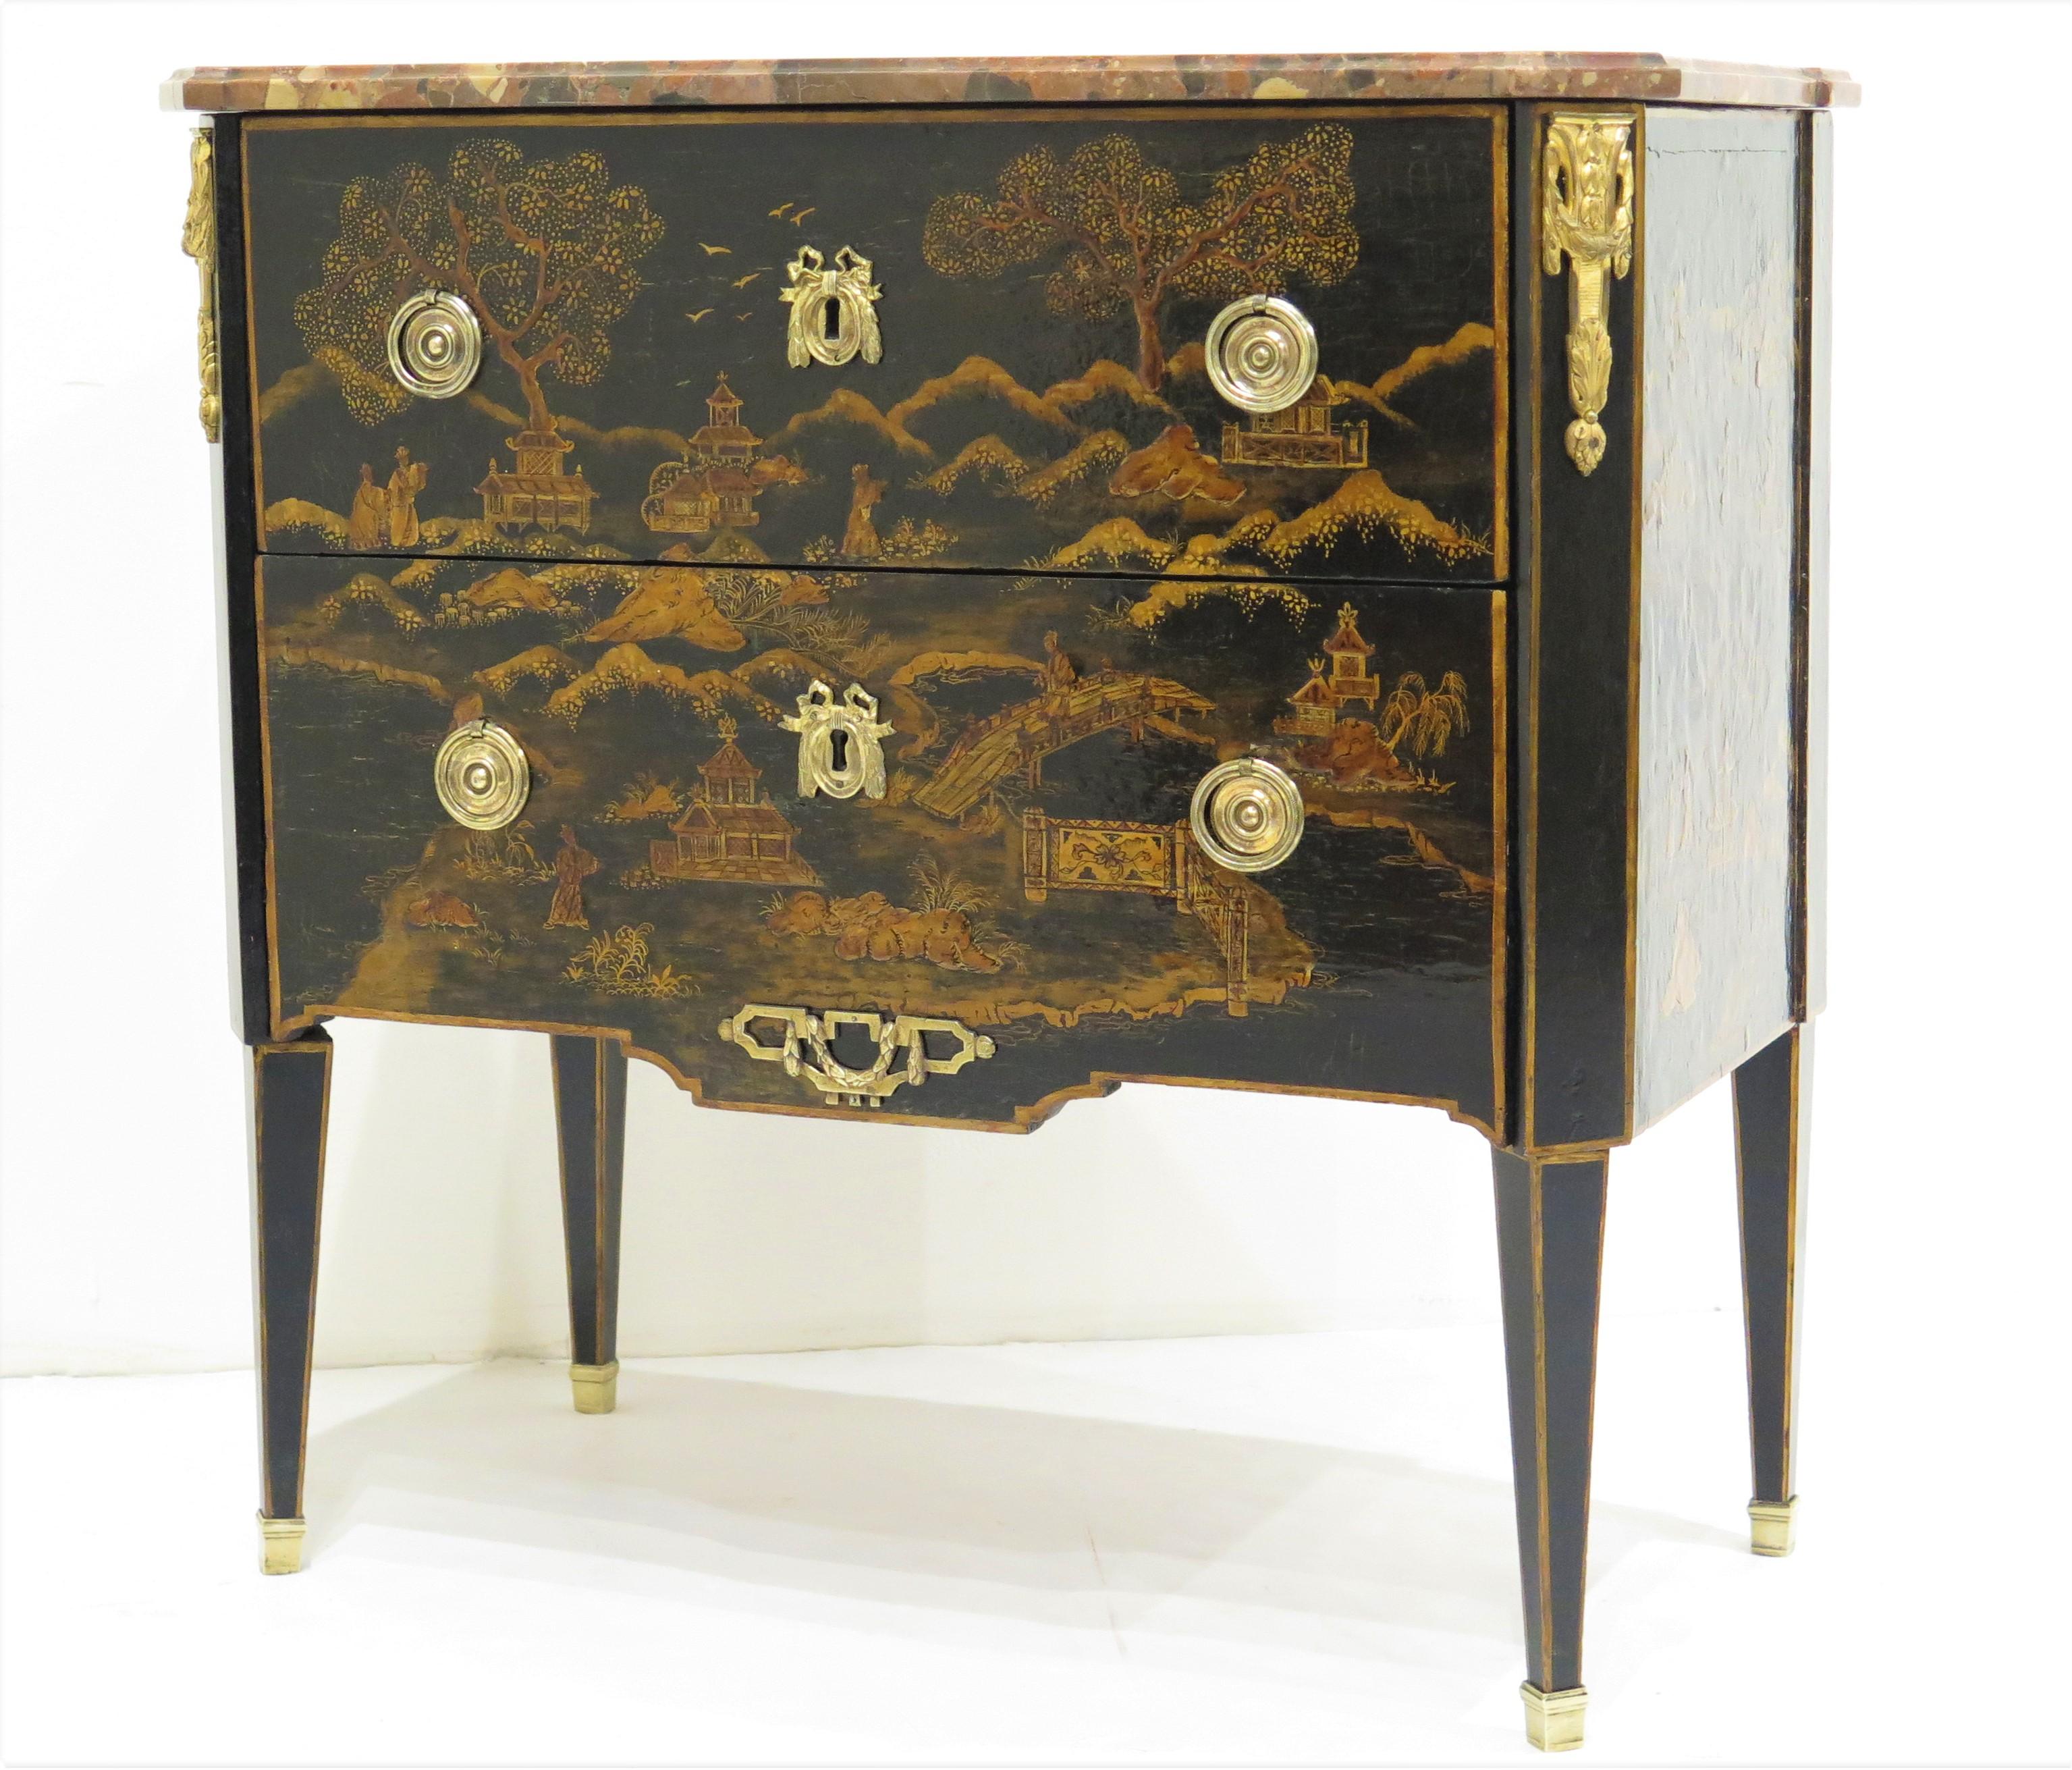 a petite period Louis XVI two-drawer commode black lacquer with gold Chinoserie decoration, gilt bronze mounts, elegant round / ring pulls, beautiful keyhole escutcheons with bows, and having a shaped conforming red and grey veined marble top, on